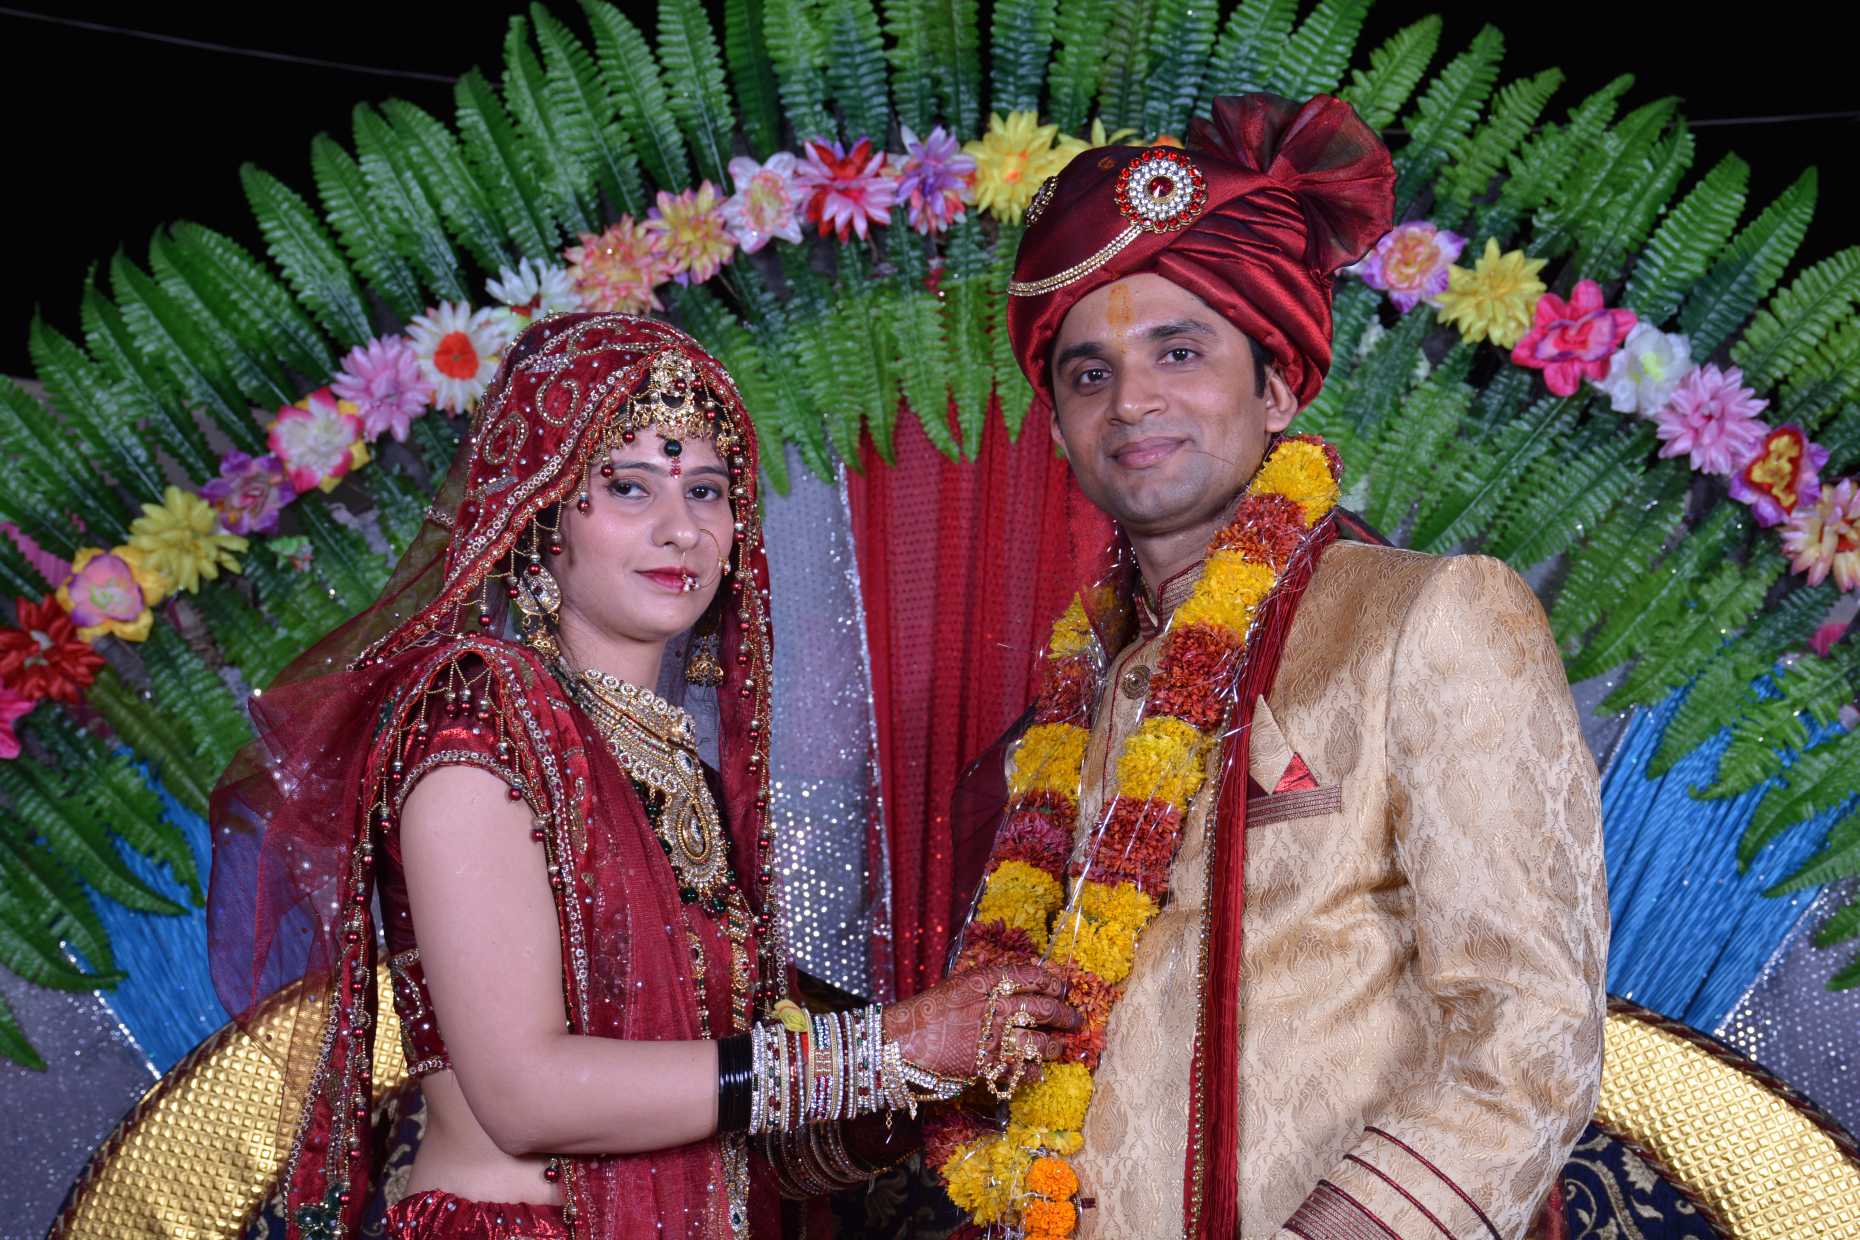 Sudhir and his wife Yogita at their wedding